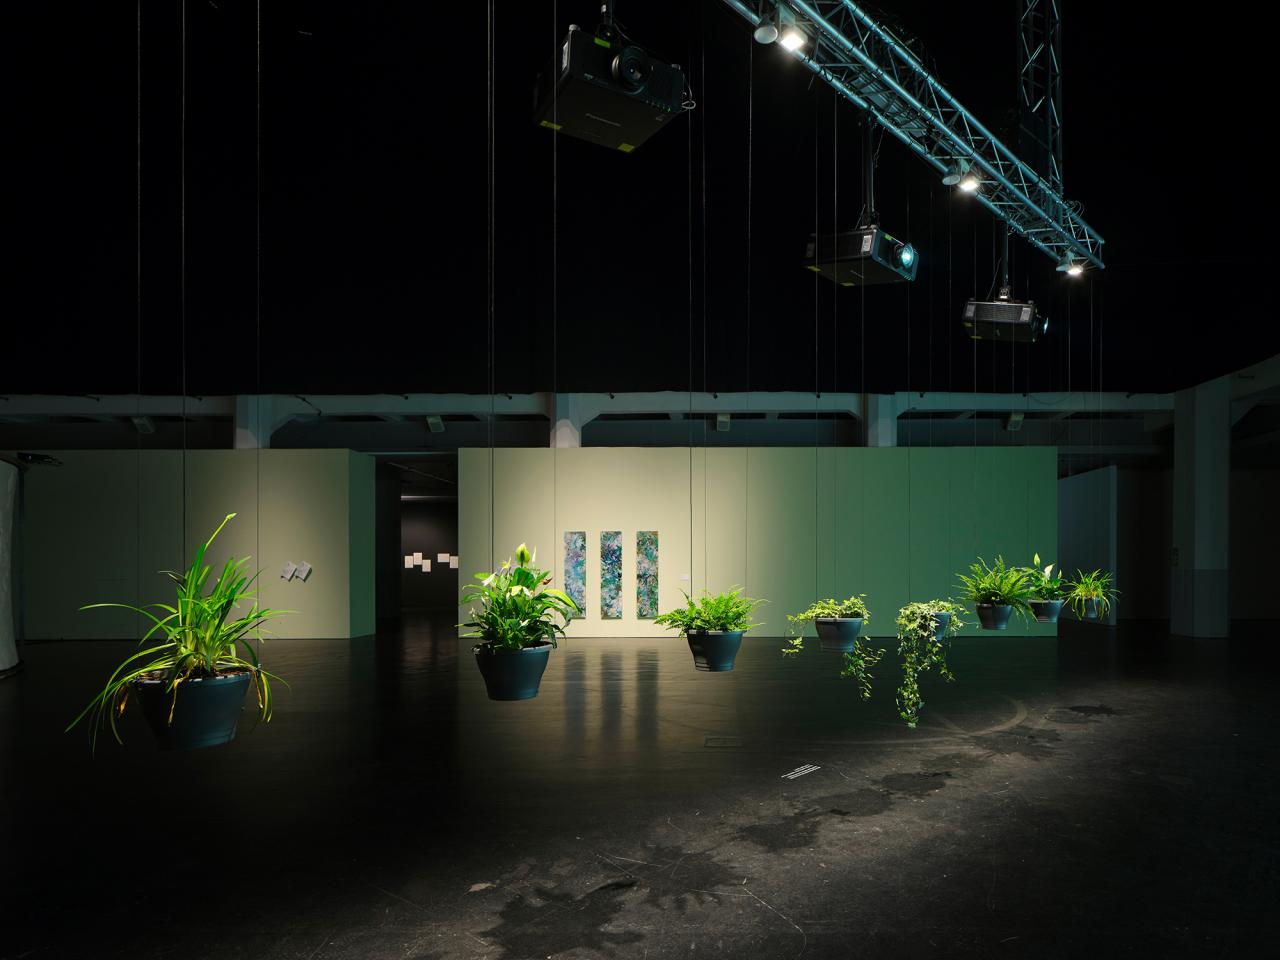 On display is the work "Eau de Jardin". The picture shows a total view of the work. The plants hang in pots arranged in a row from the ceiling and hang in front of a large canvas.